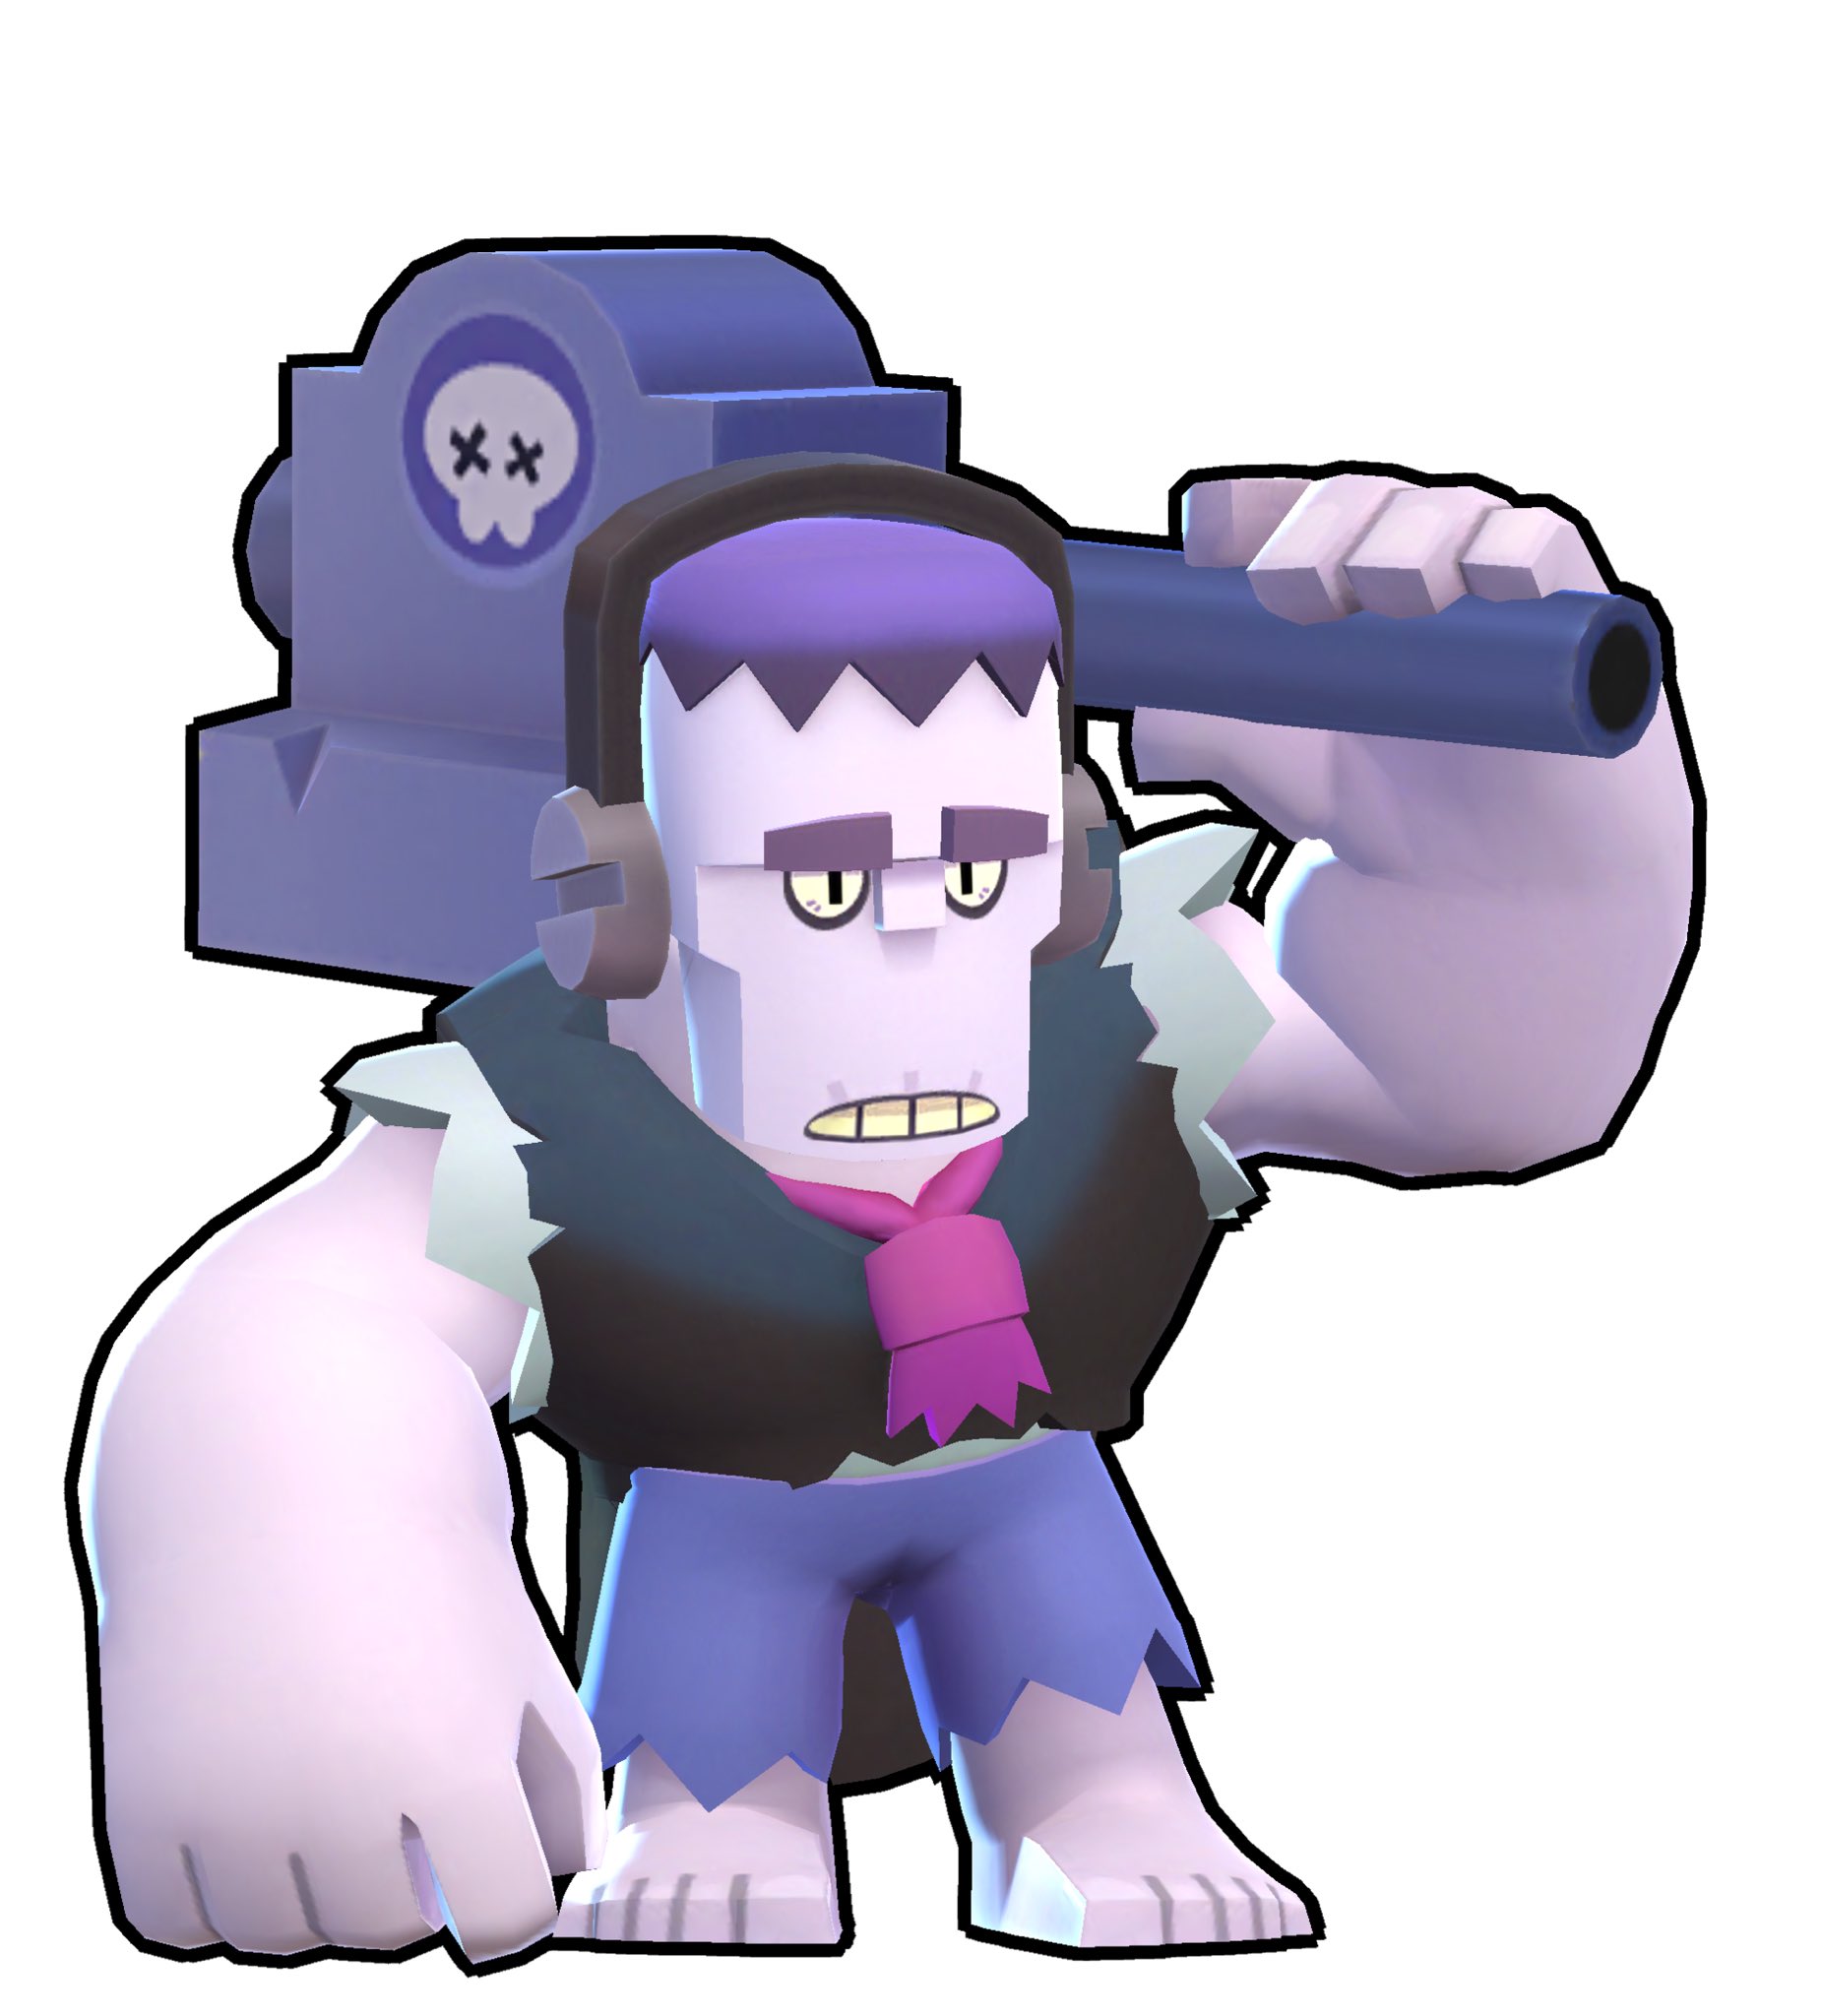 Code Ashbs בטוויטר After The Balance Changes And After Much Consideration I Believe The Worst Overall Brawler In The Game Right Now Is Frank He S Not A Bad Brawler And Sometimes You Can Go God Mode With Him And Super Chains But He S A Very - brawl stars nouveau brawler ashtax